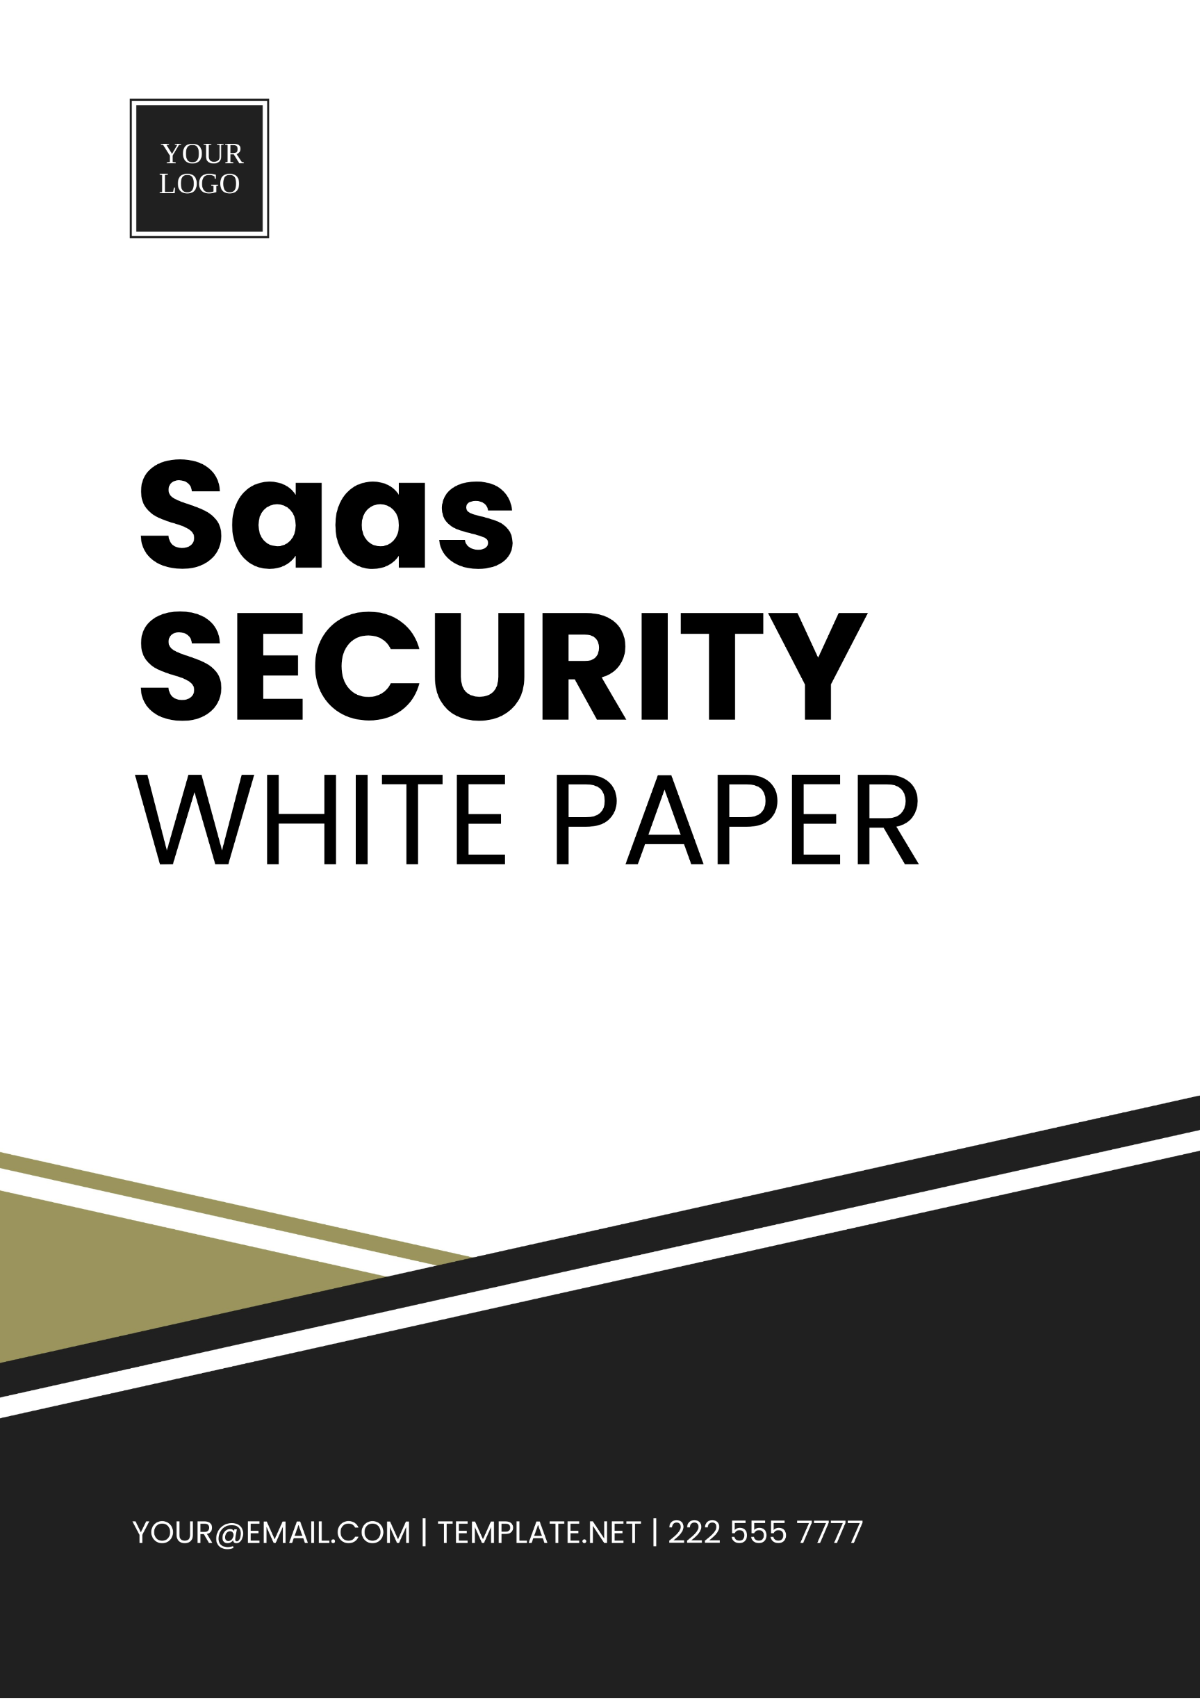 SaaS Security White Paper Template